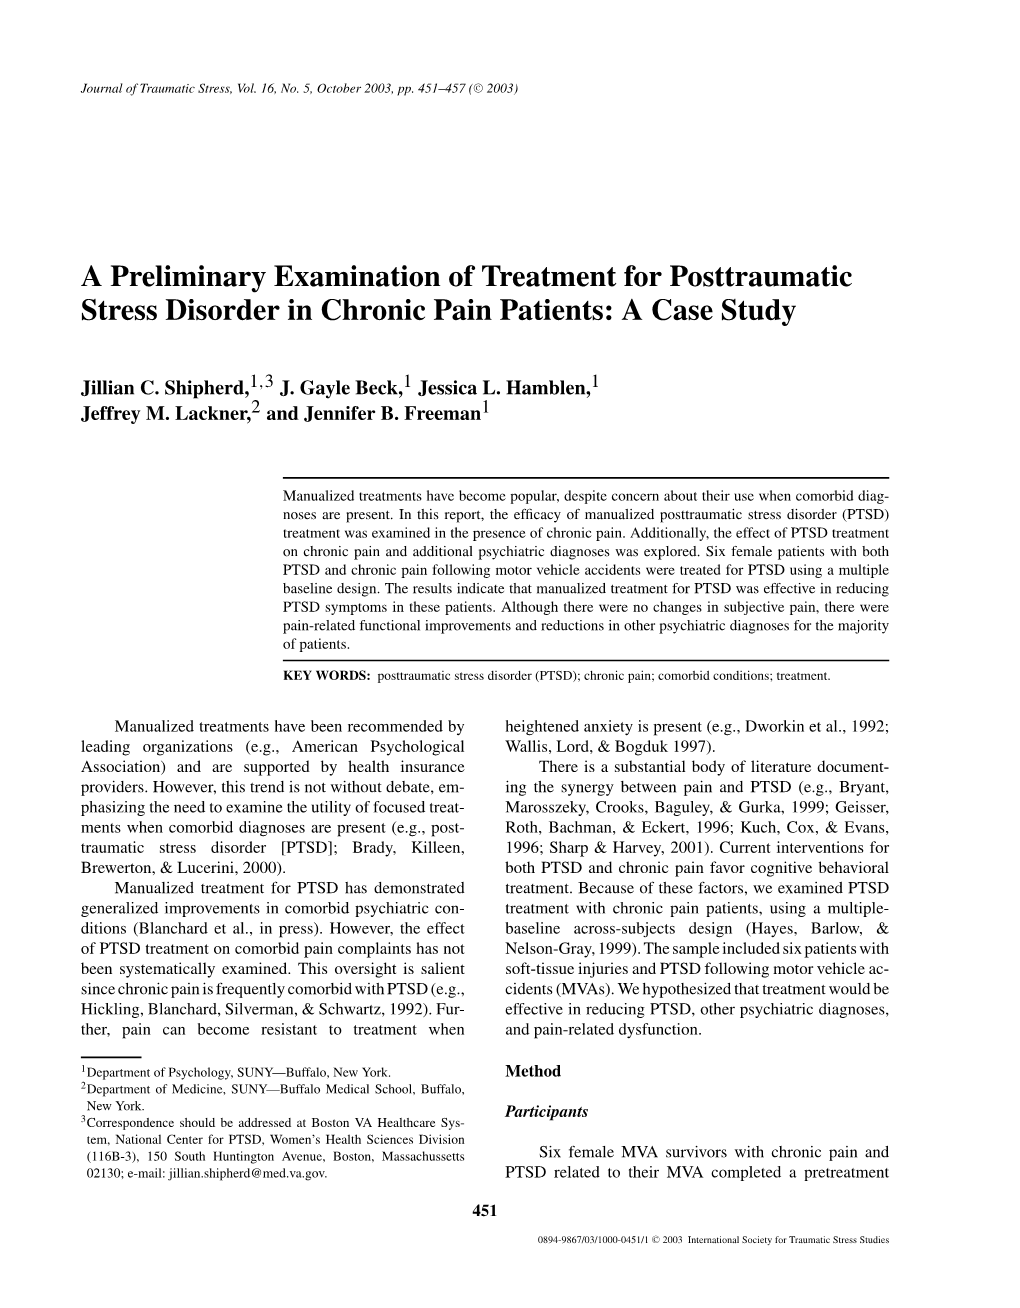 A Preliminary Examination of Treatment for Posttraumatic Stress Disorder in Chronic Pain Patients: a Case Study